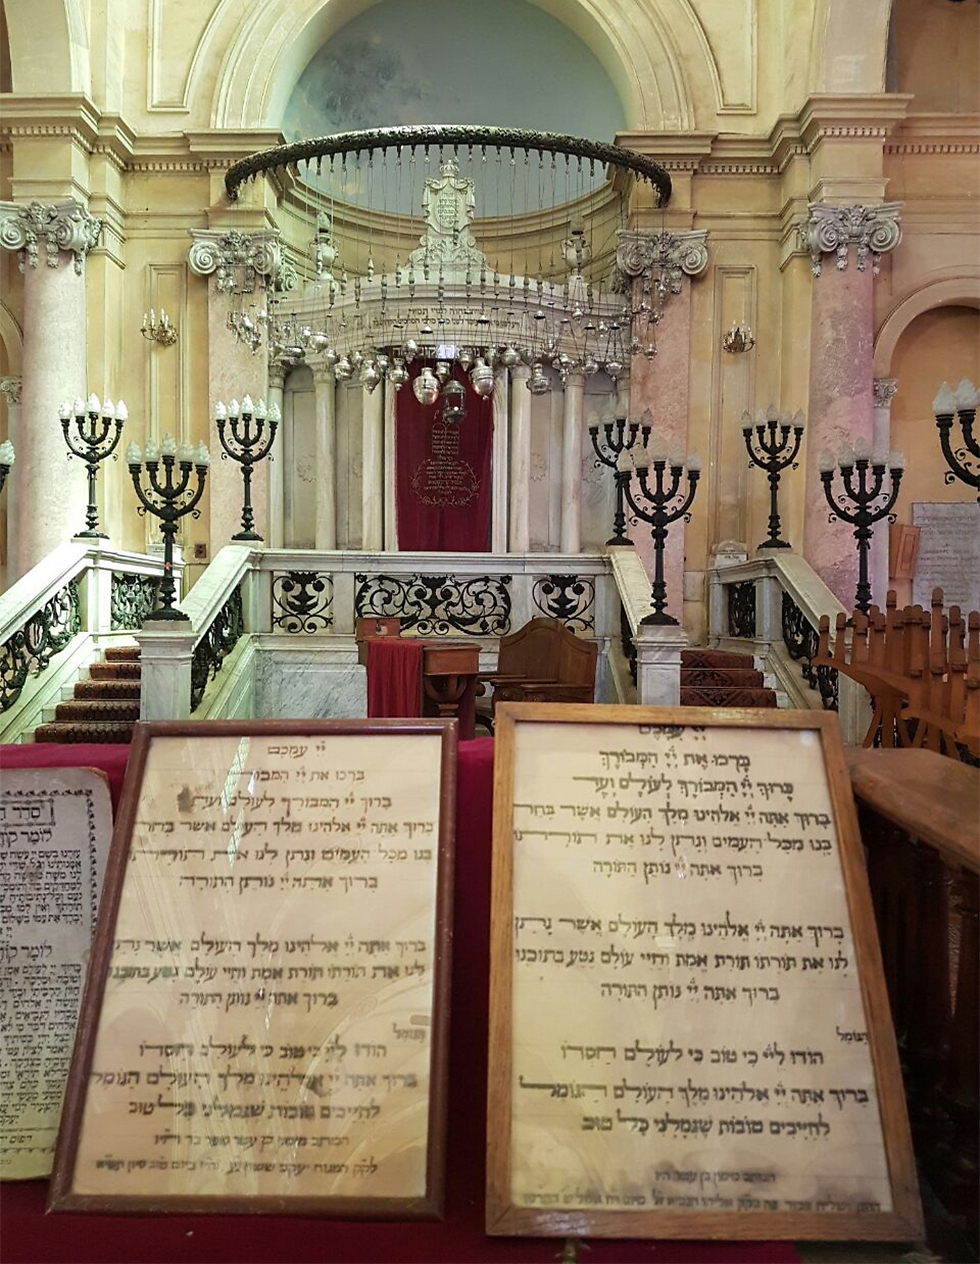 The old synagogue